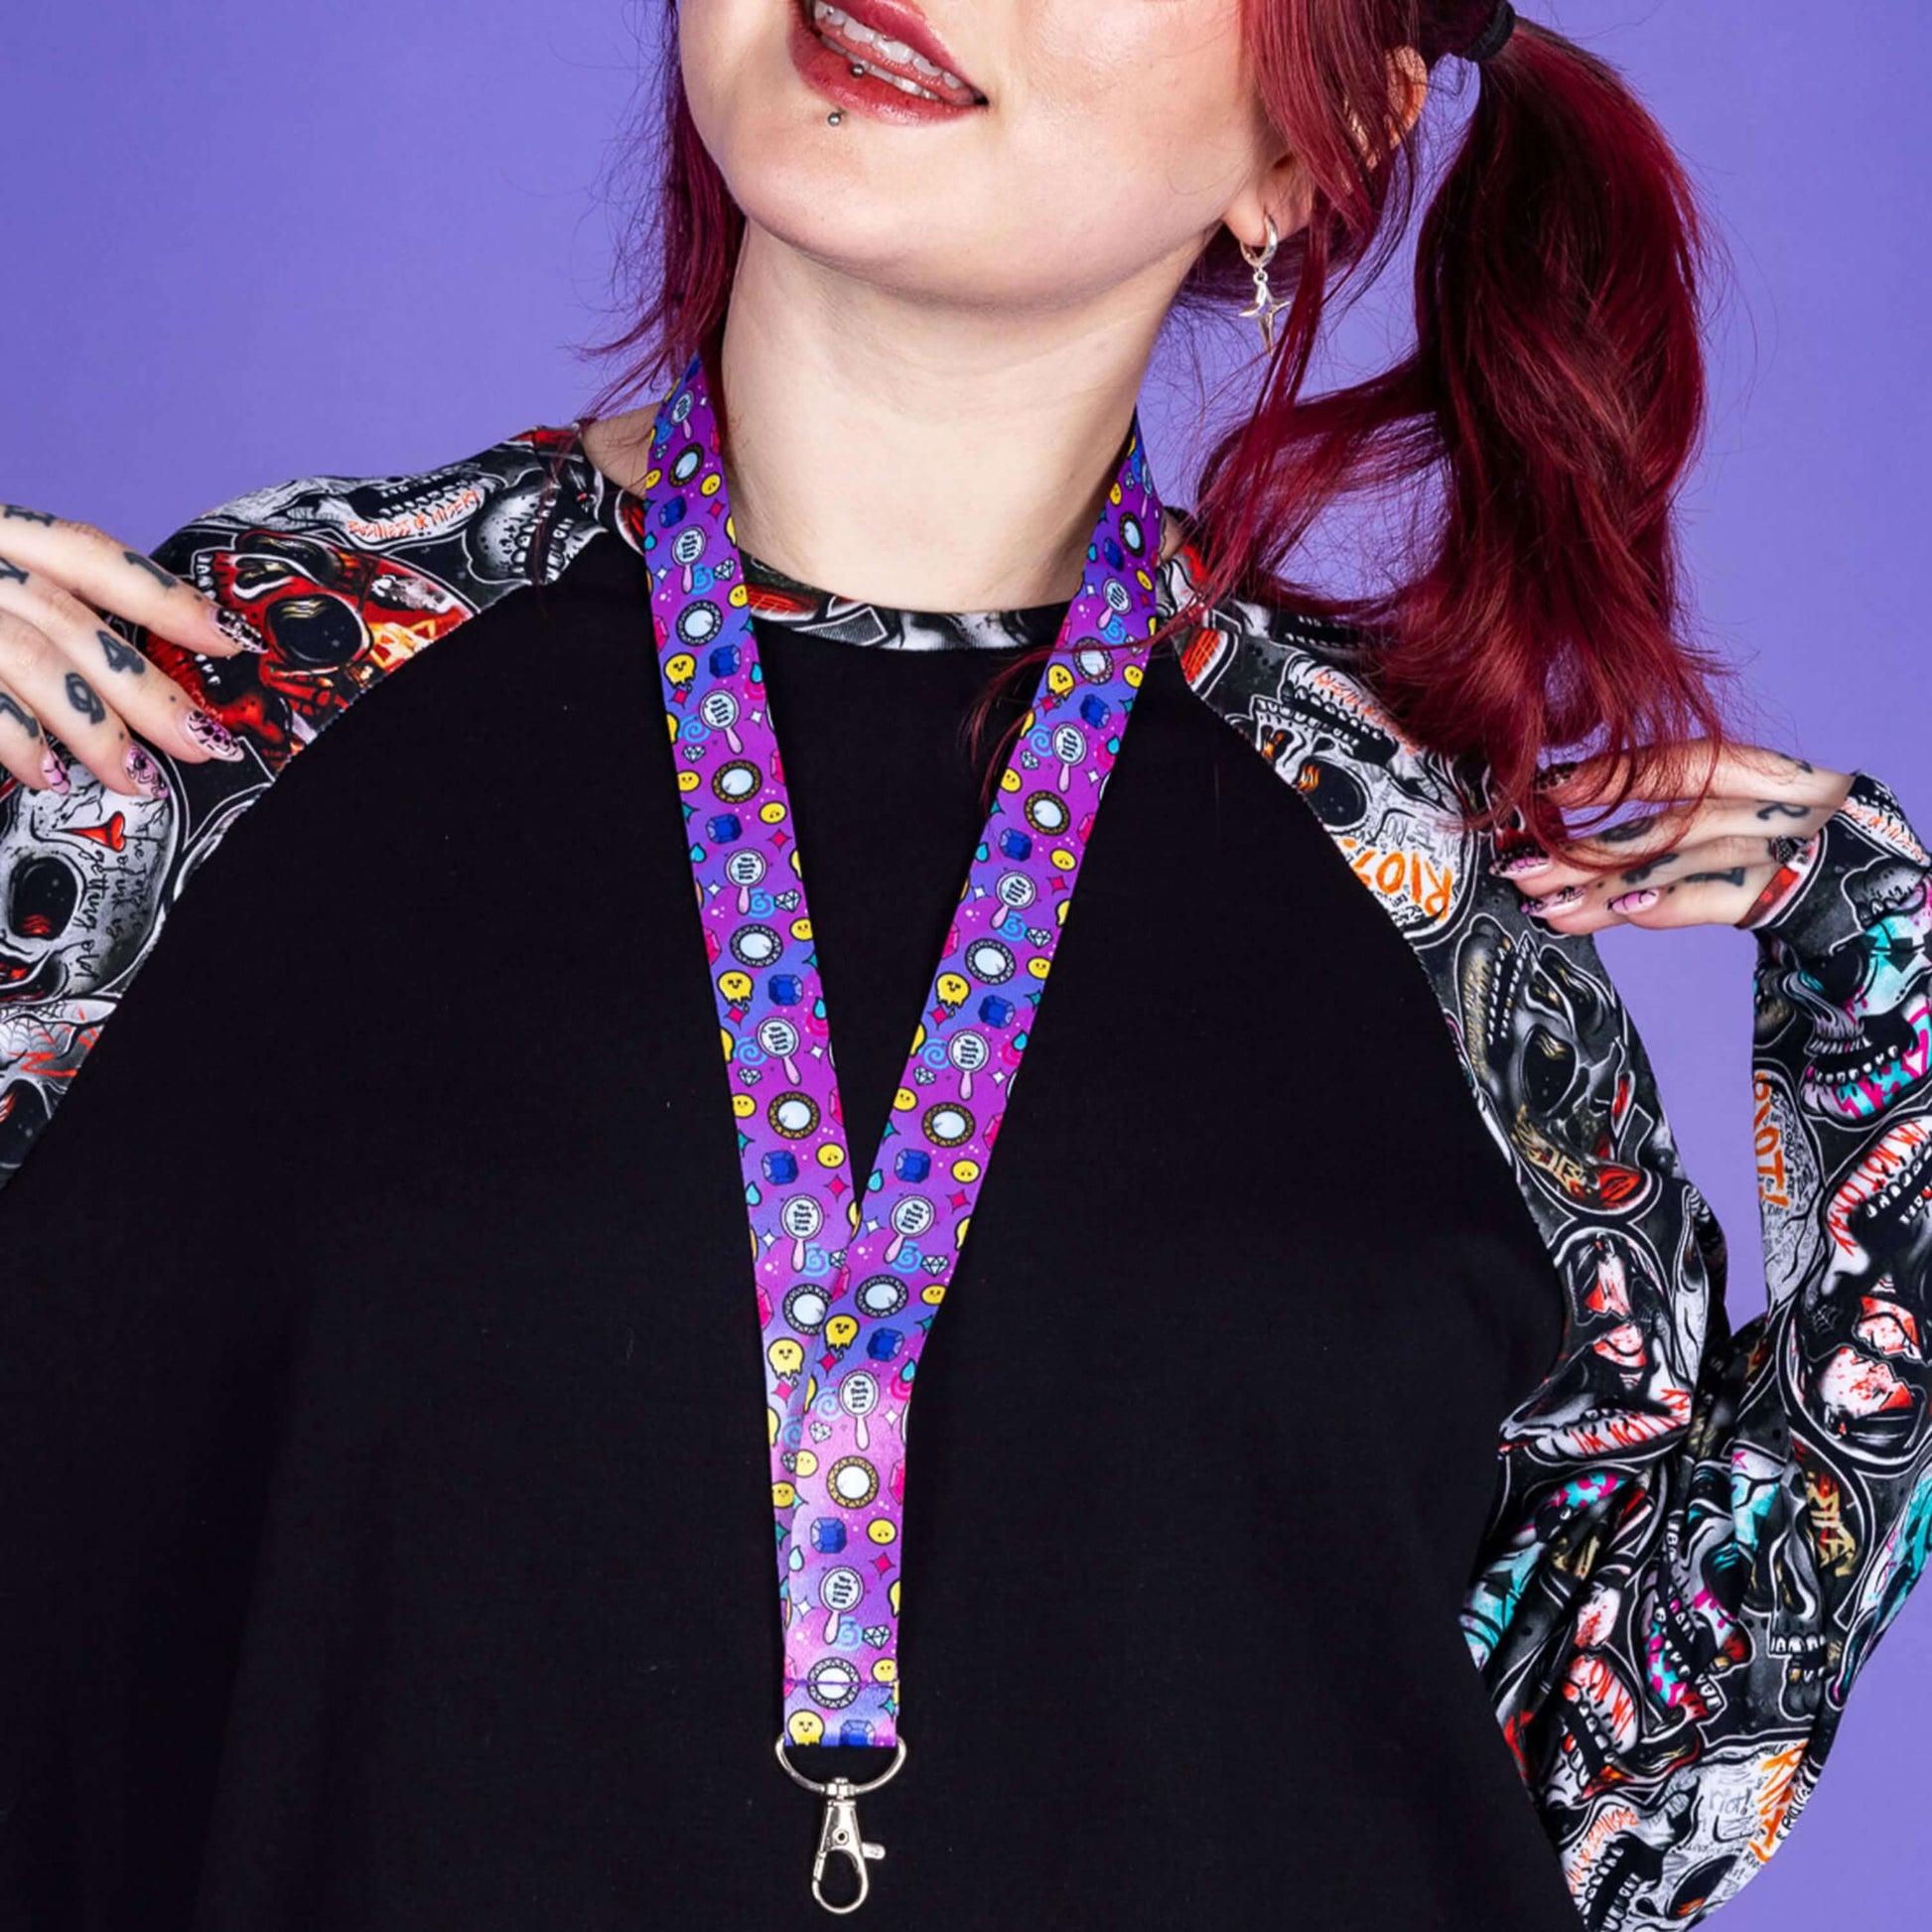 You Don't Look Sick Lanyard worn by a tattooed alternative model with red hair in bunches wearing an emo skull raglan top from wildemode. Silver clip purple lanyard features melting yellow smiley faces, mirrors, gemstones, teardrops, sparkles, swirls and dots with a centre hand held mirror reading 'you don't look sick'. The hand drawn design is raising awareness for invisible illnesses.